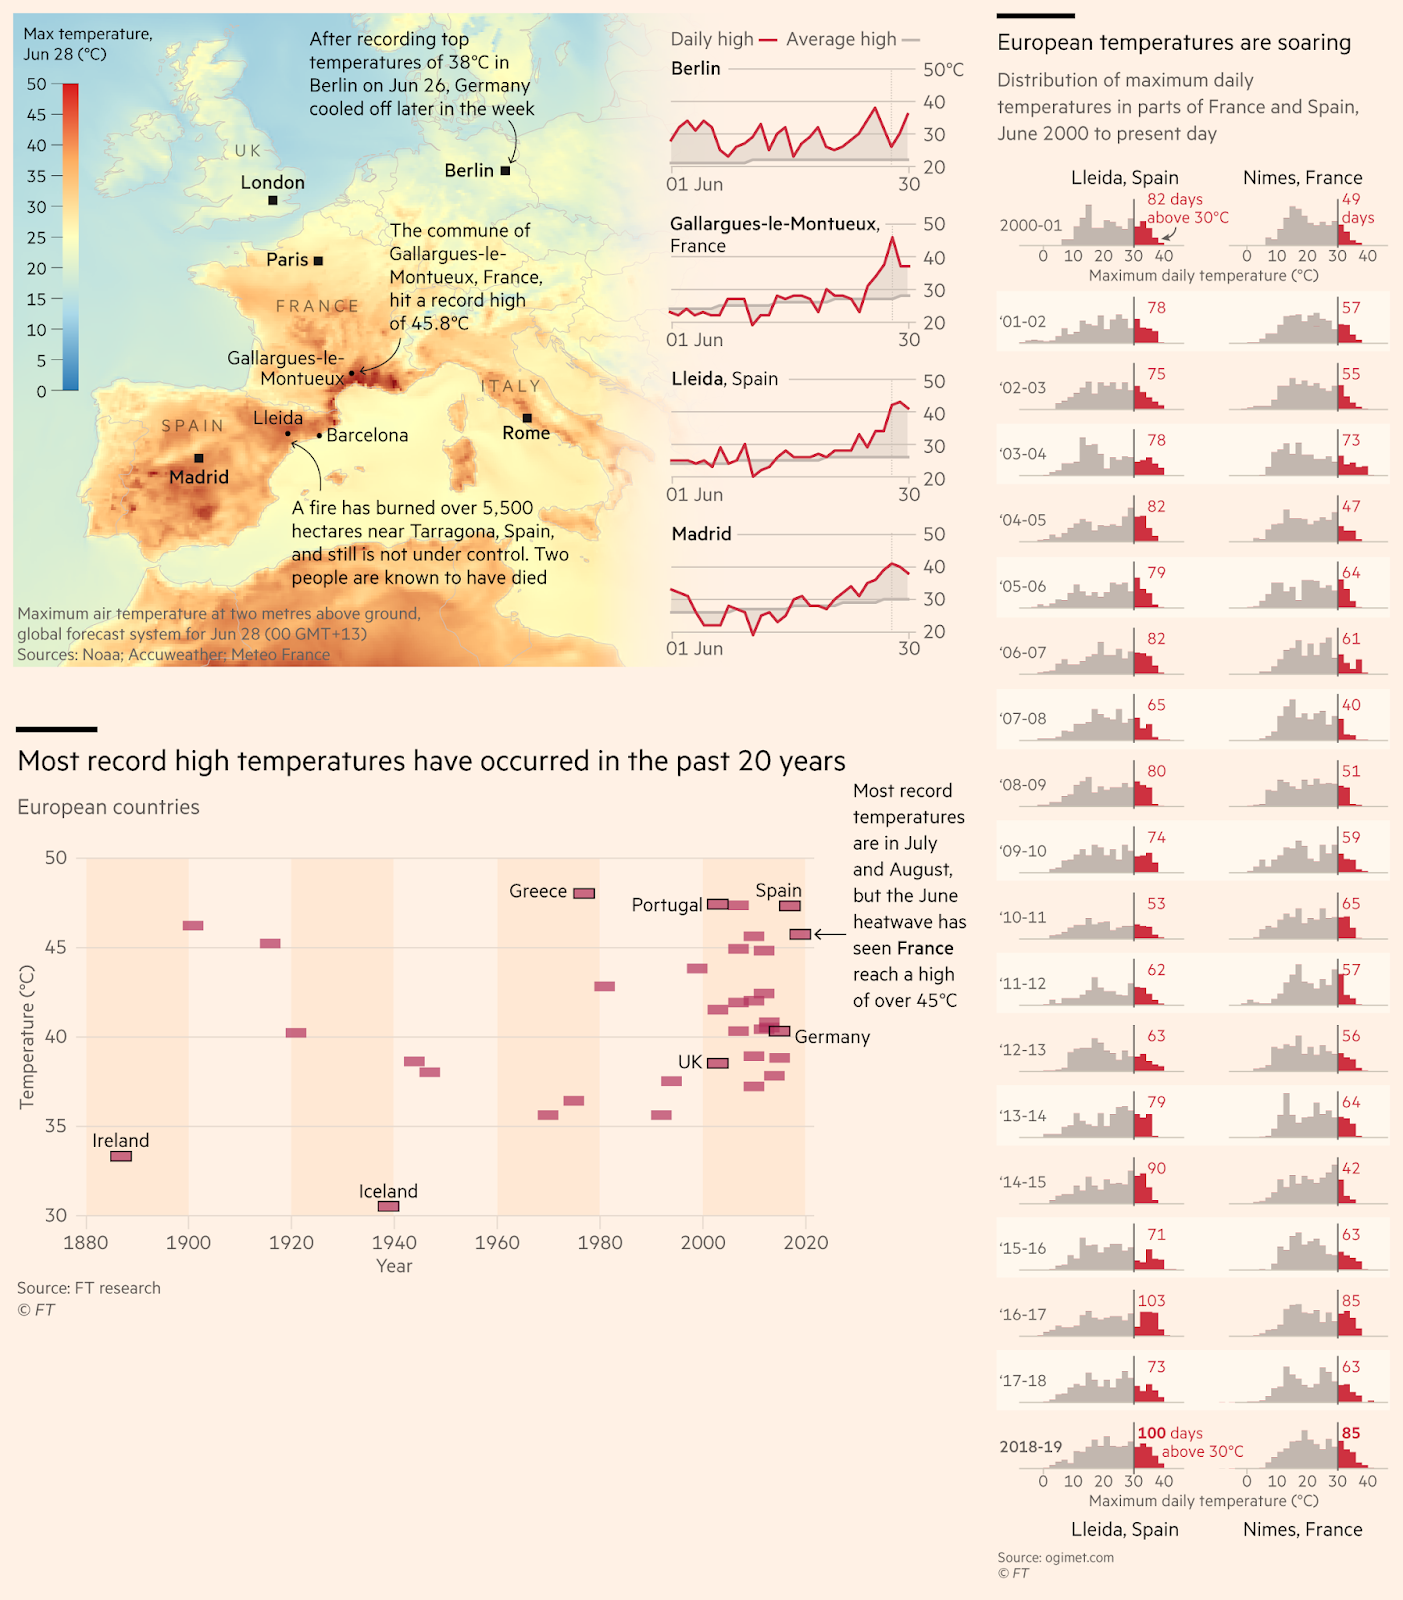 European temperatures are rising, most record temperatures have occurred in the past 20 years